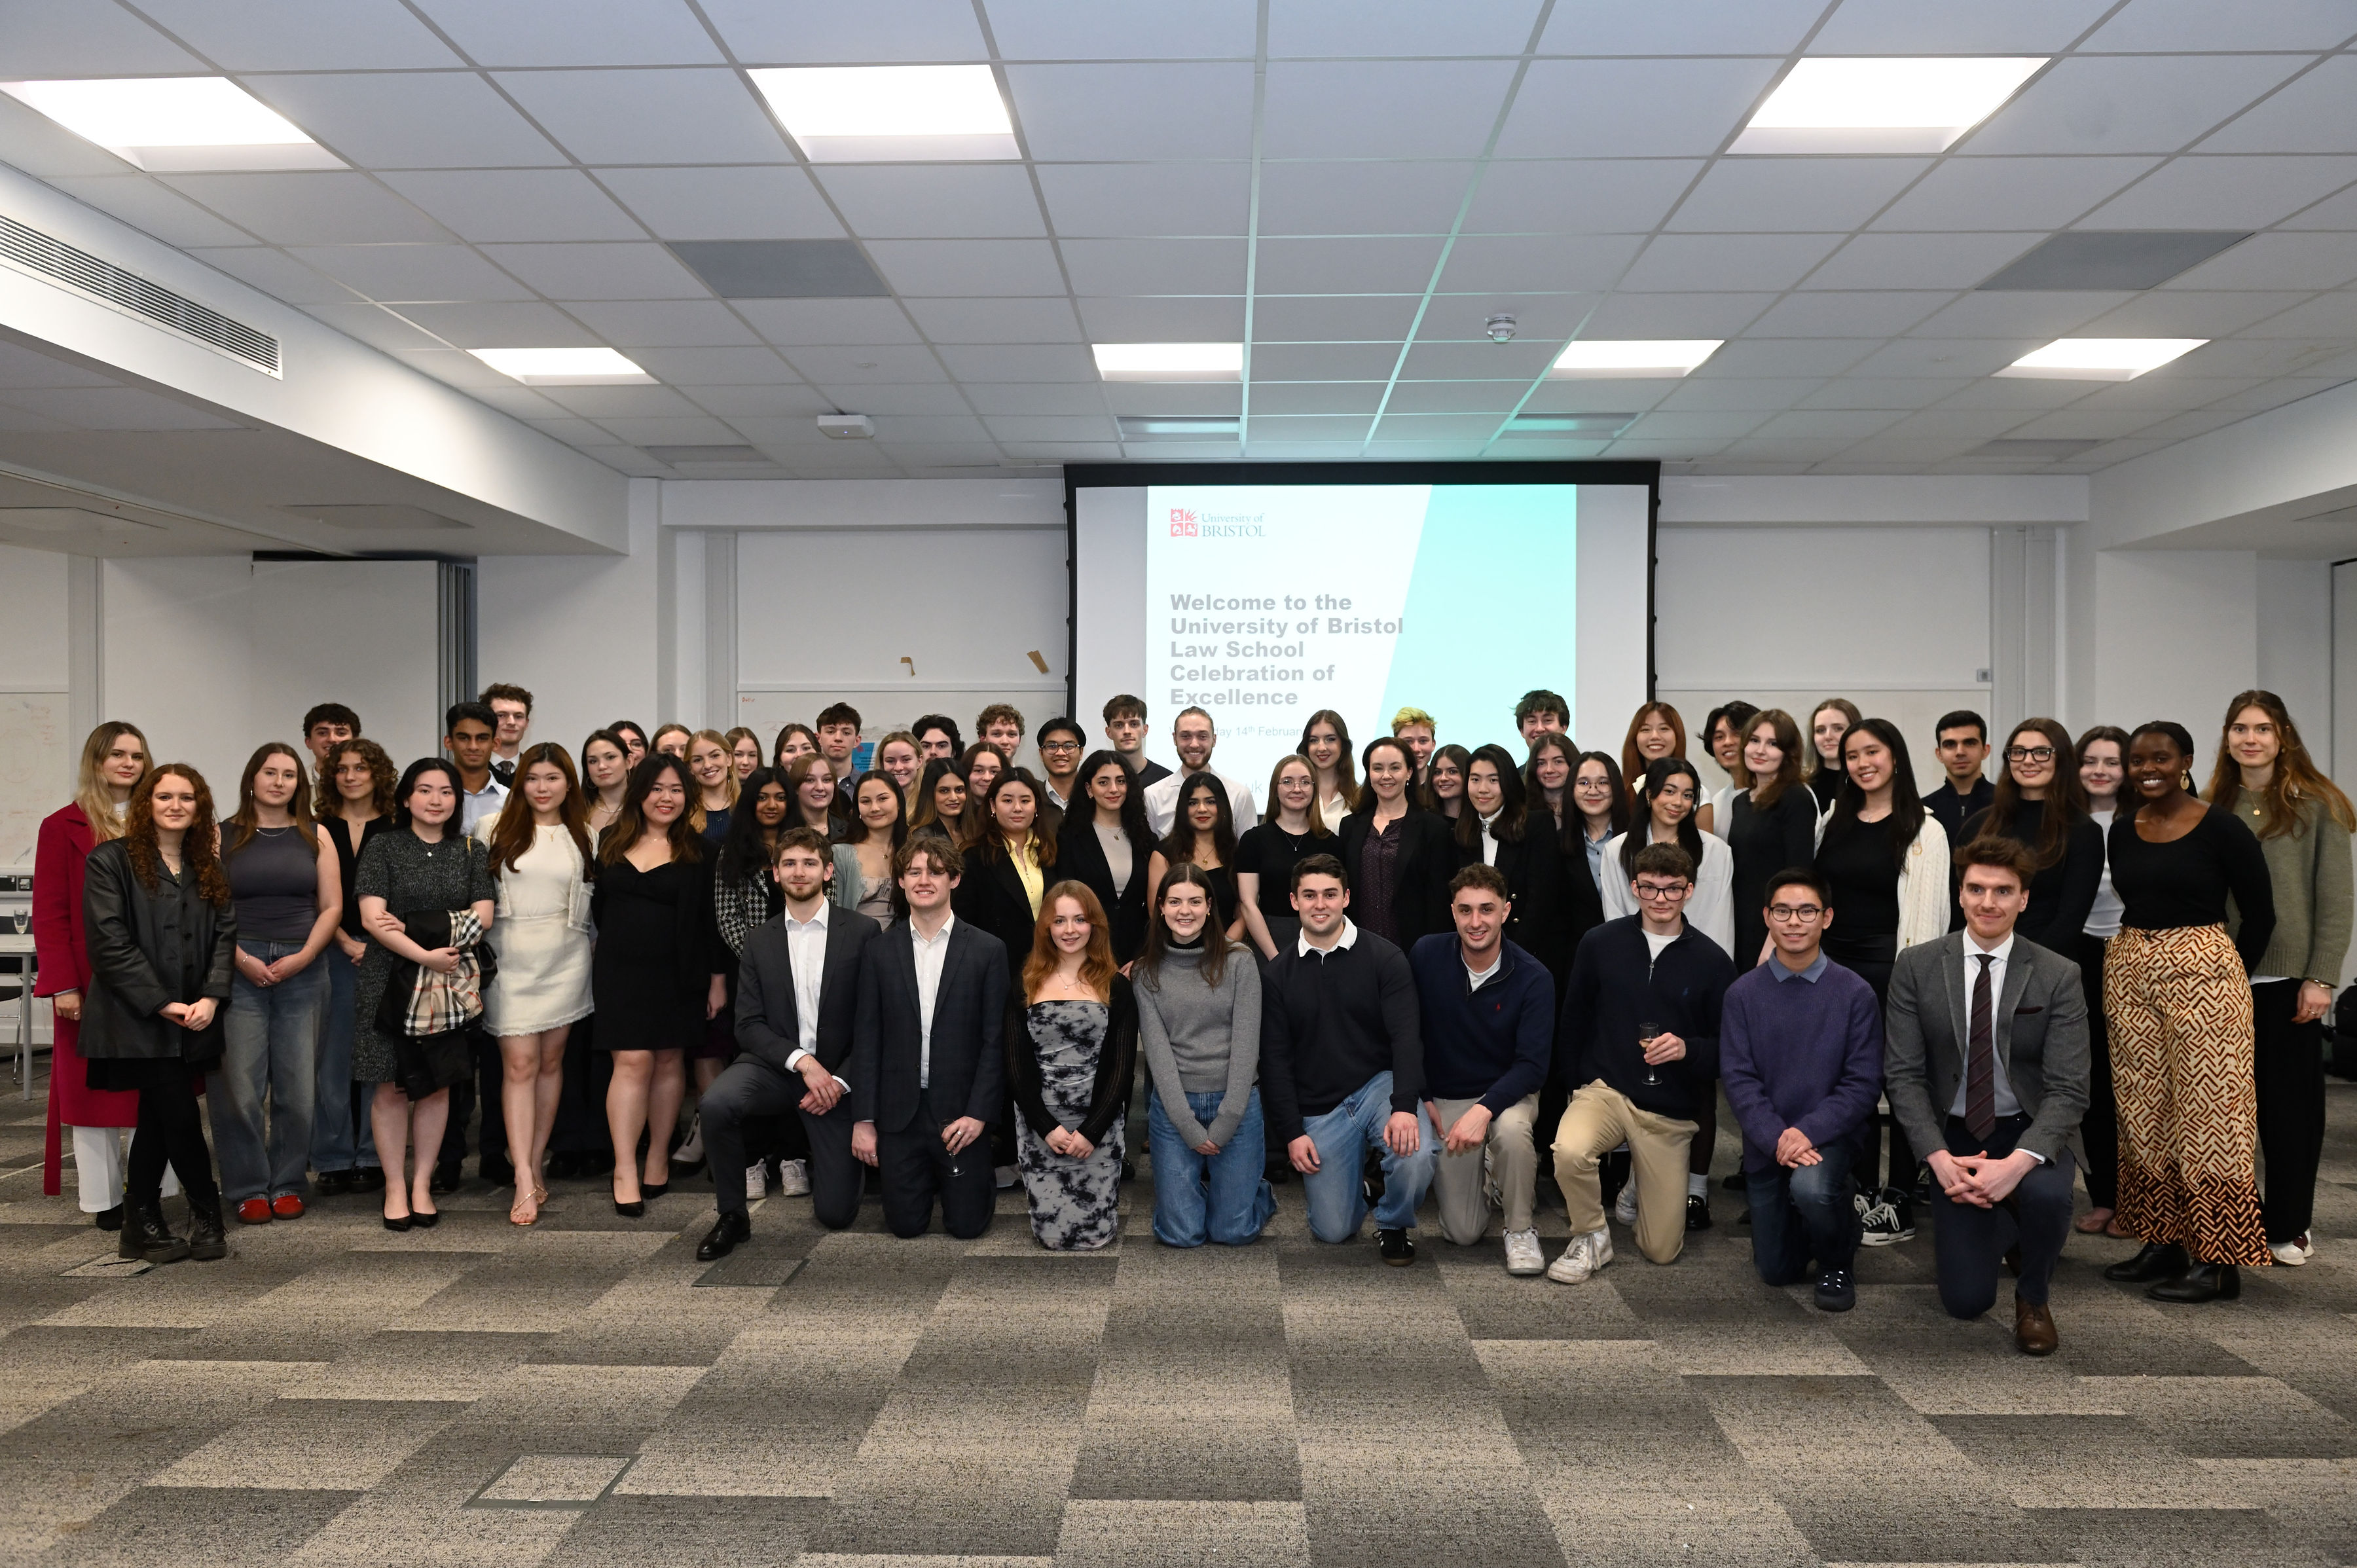 large group shot of law student prize winners, smiling looking at the camera, wearing smart clothes in an teaching room setting.